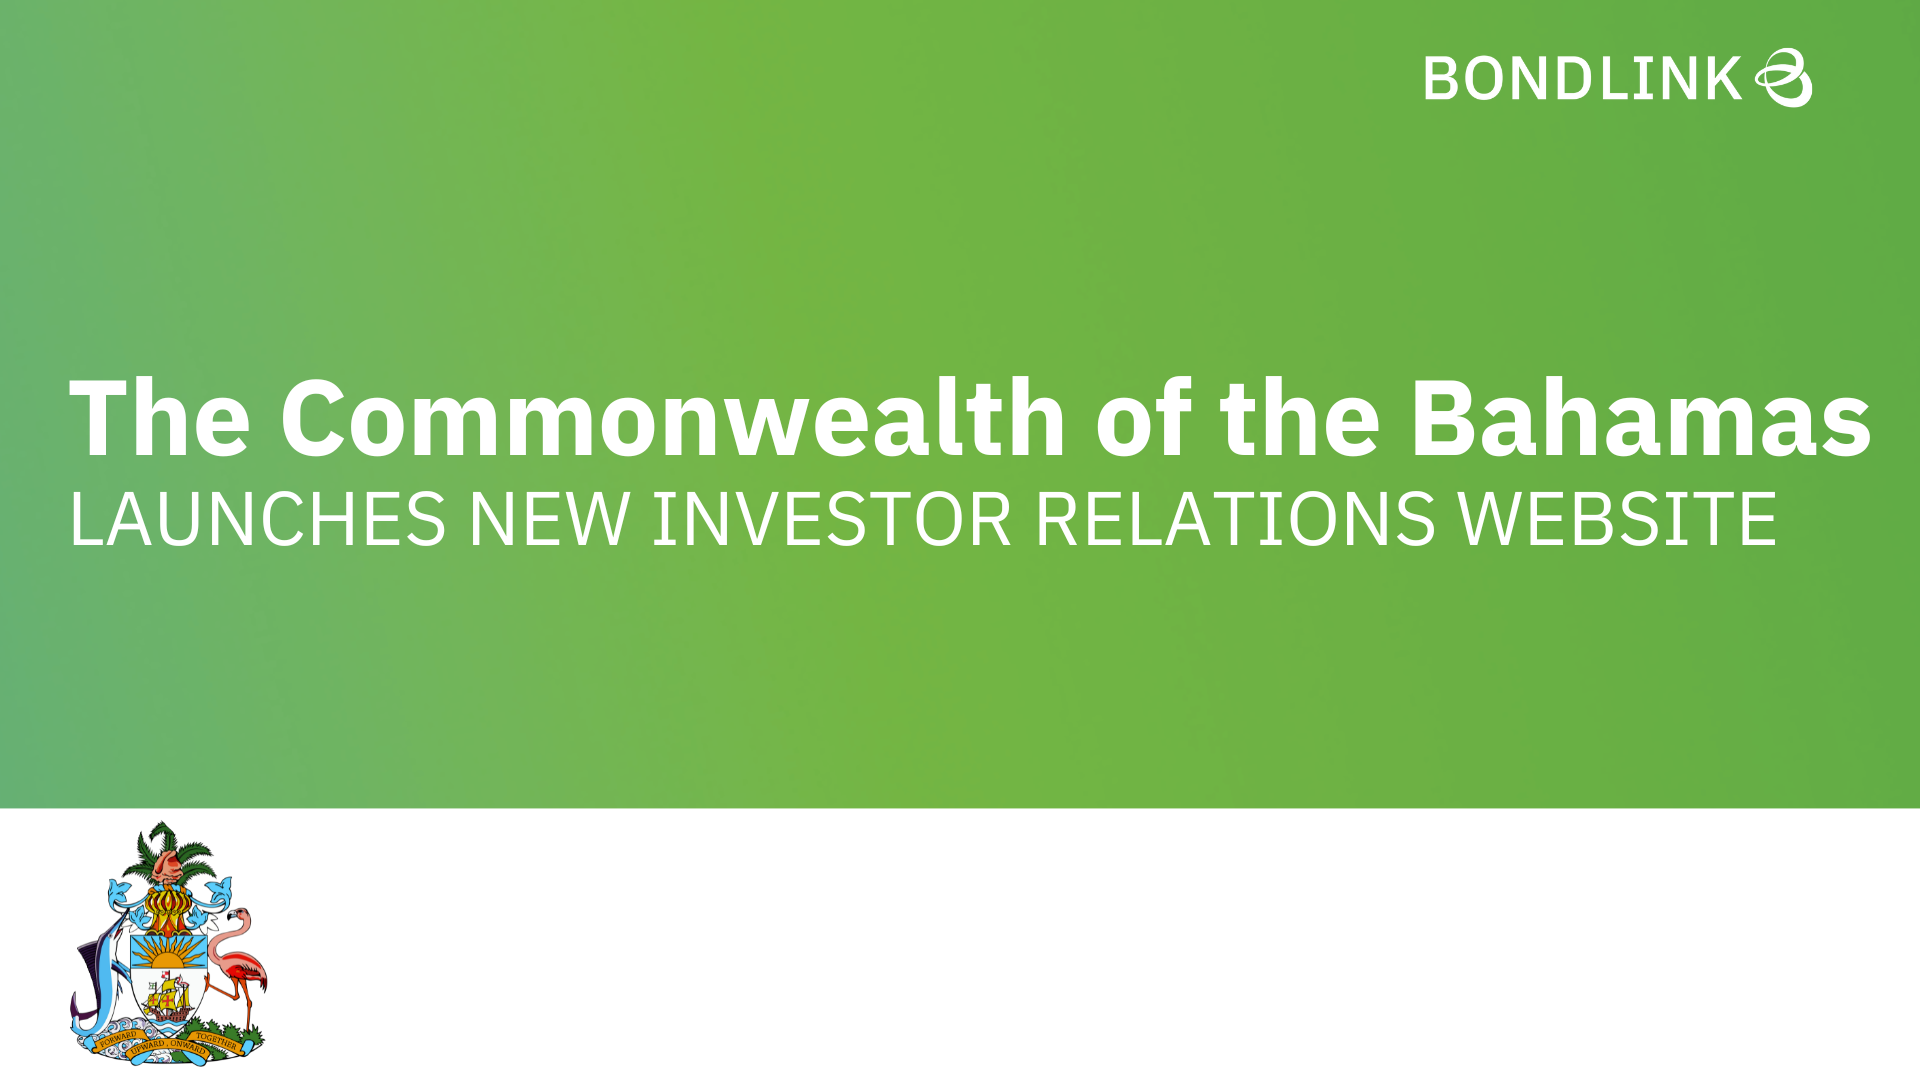 The Bahamas Announces New Investor Engagement Website to Enhance Financial Transparency